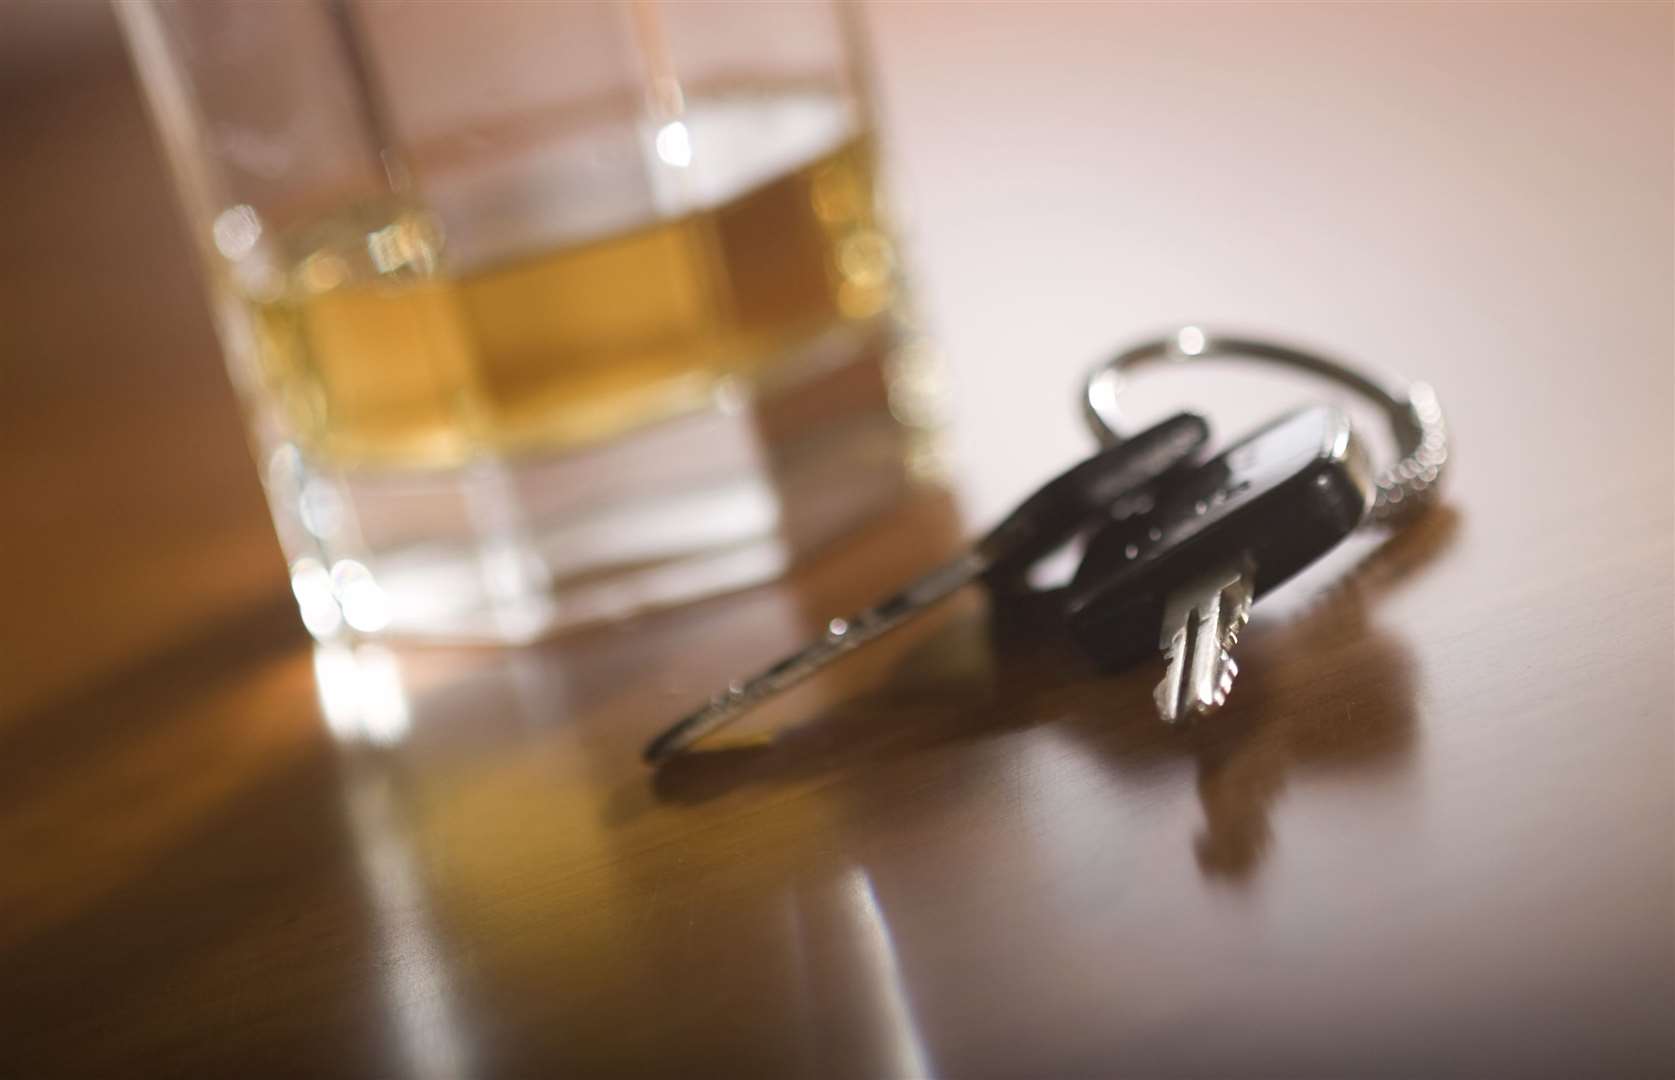 Bielinis took the keys from his friend's home and drove his car while over the legal drink-drive limit. Stock picture: iStock